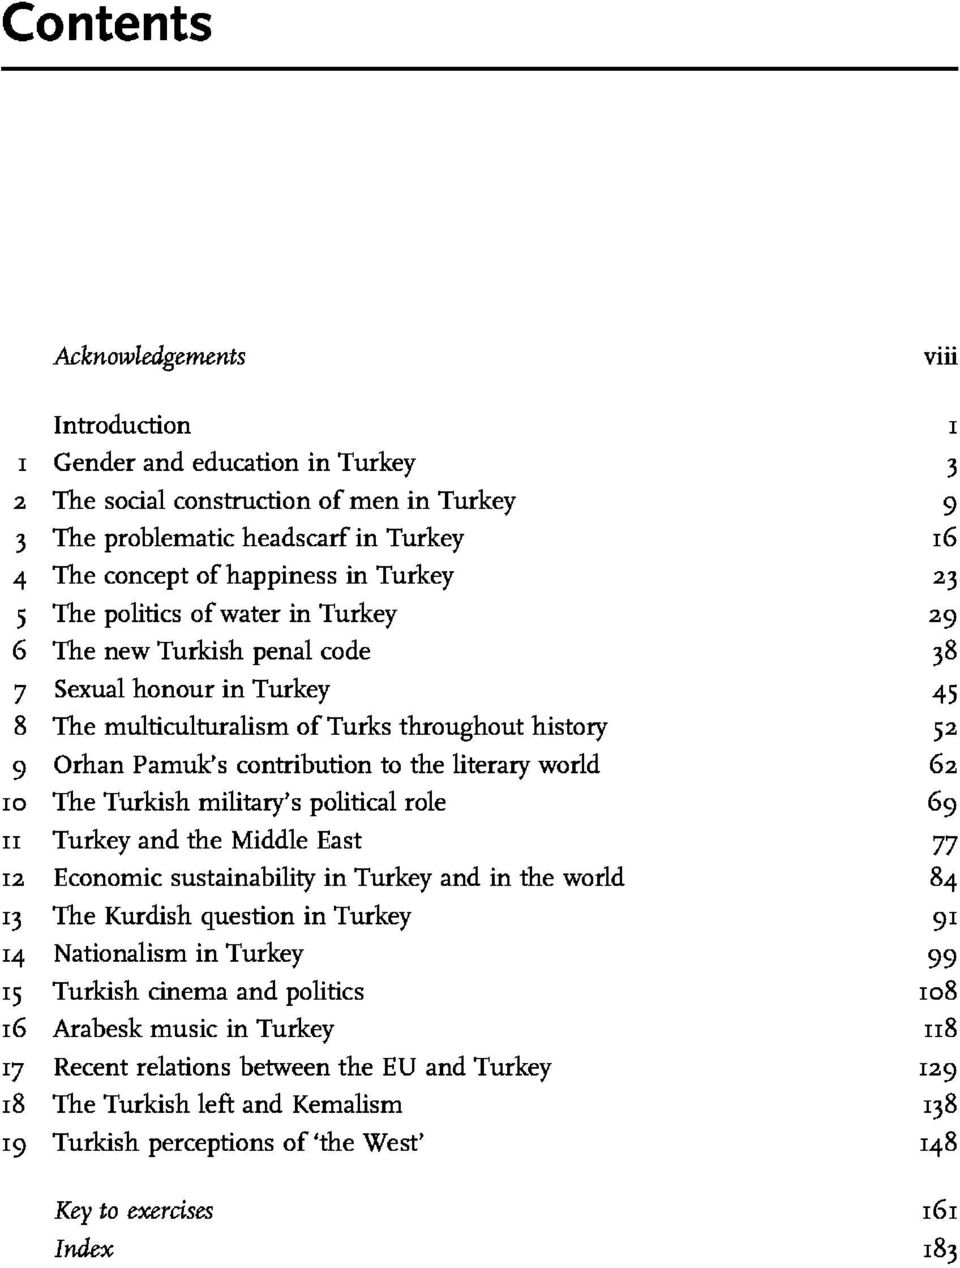 literary world 62 IO The Turkish military's political role 69 II Turkey and the Middle East 77 I2 Economic sustainability in Turkey and in the world 84 I3 The Kurdish question in Turkey 9I I4